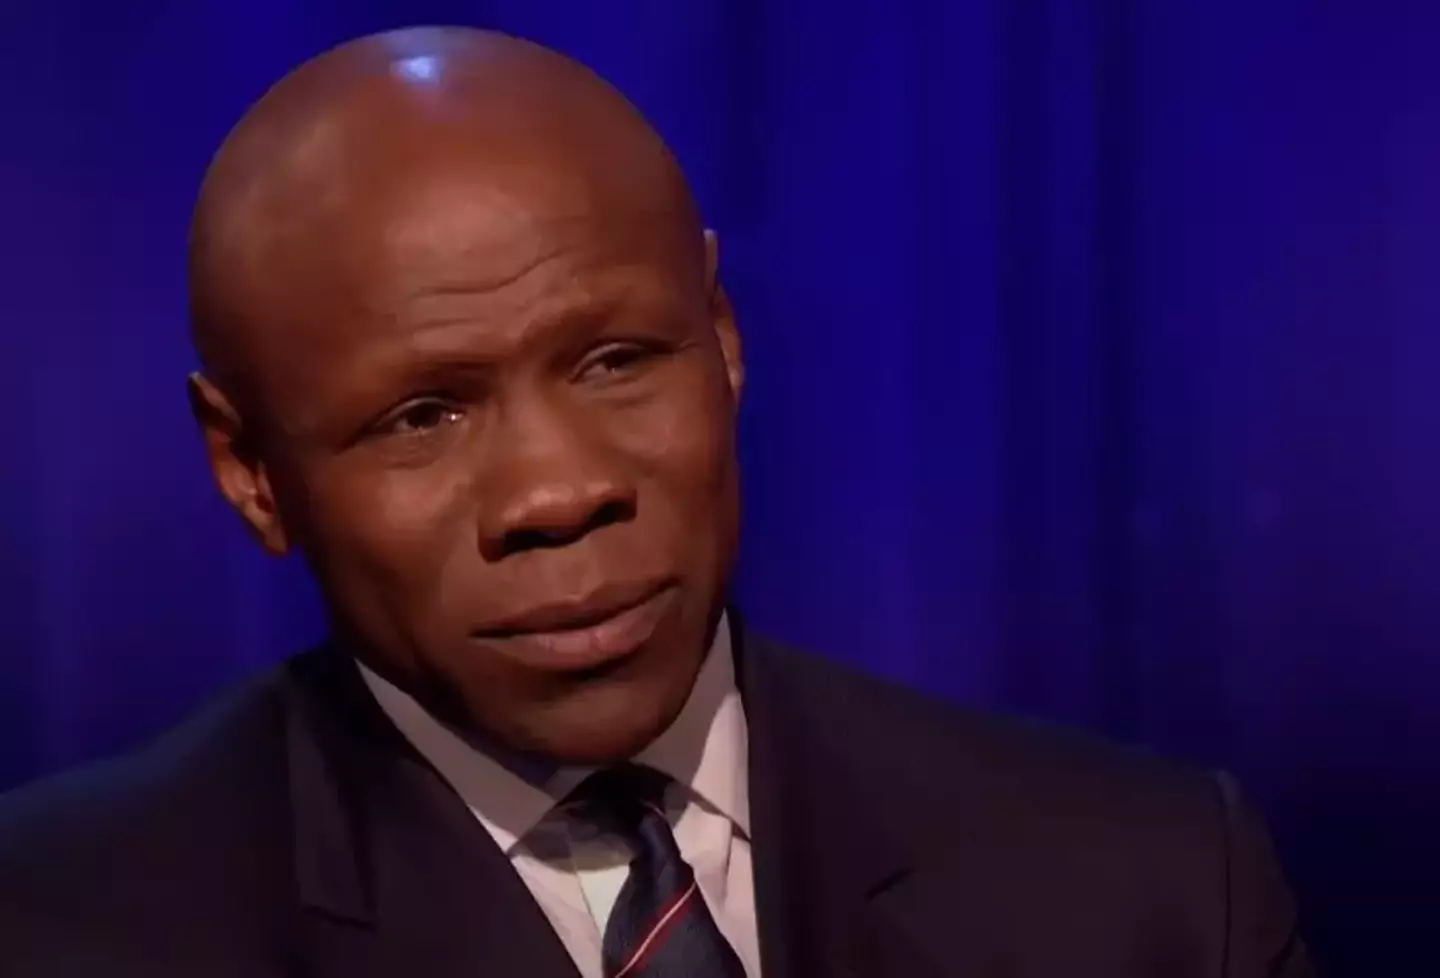 Chris Eubank says he wants 'truth and justice' over the death of his son.